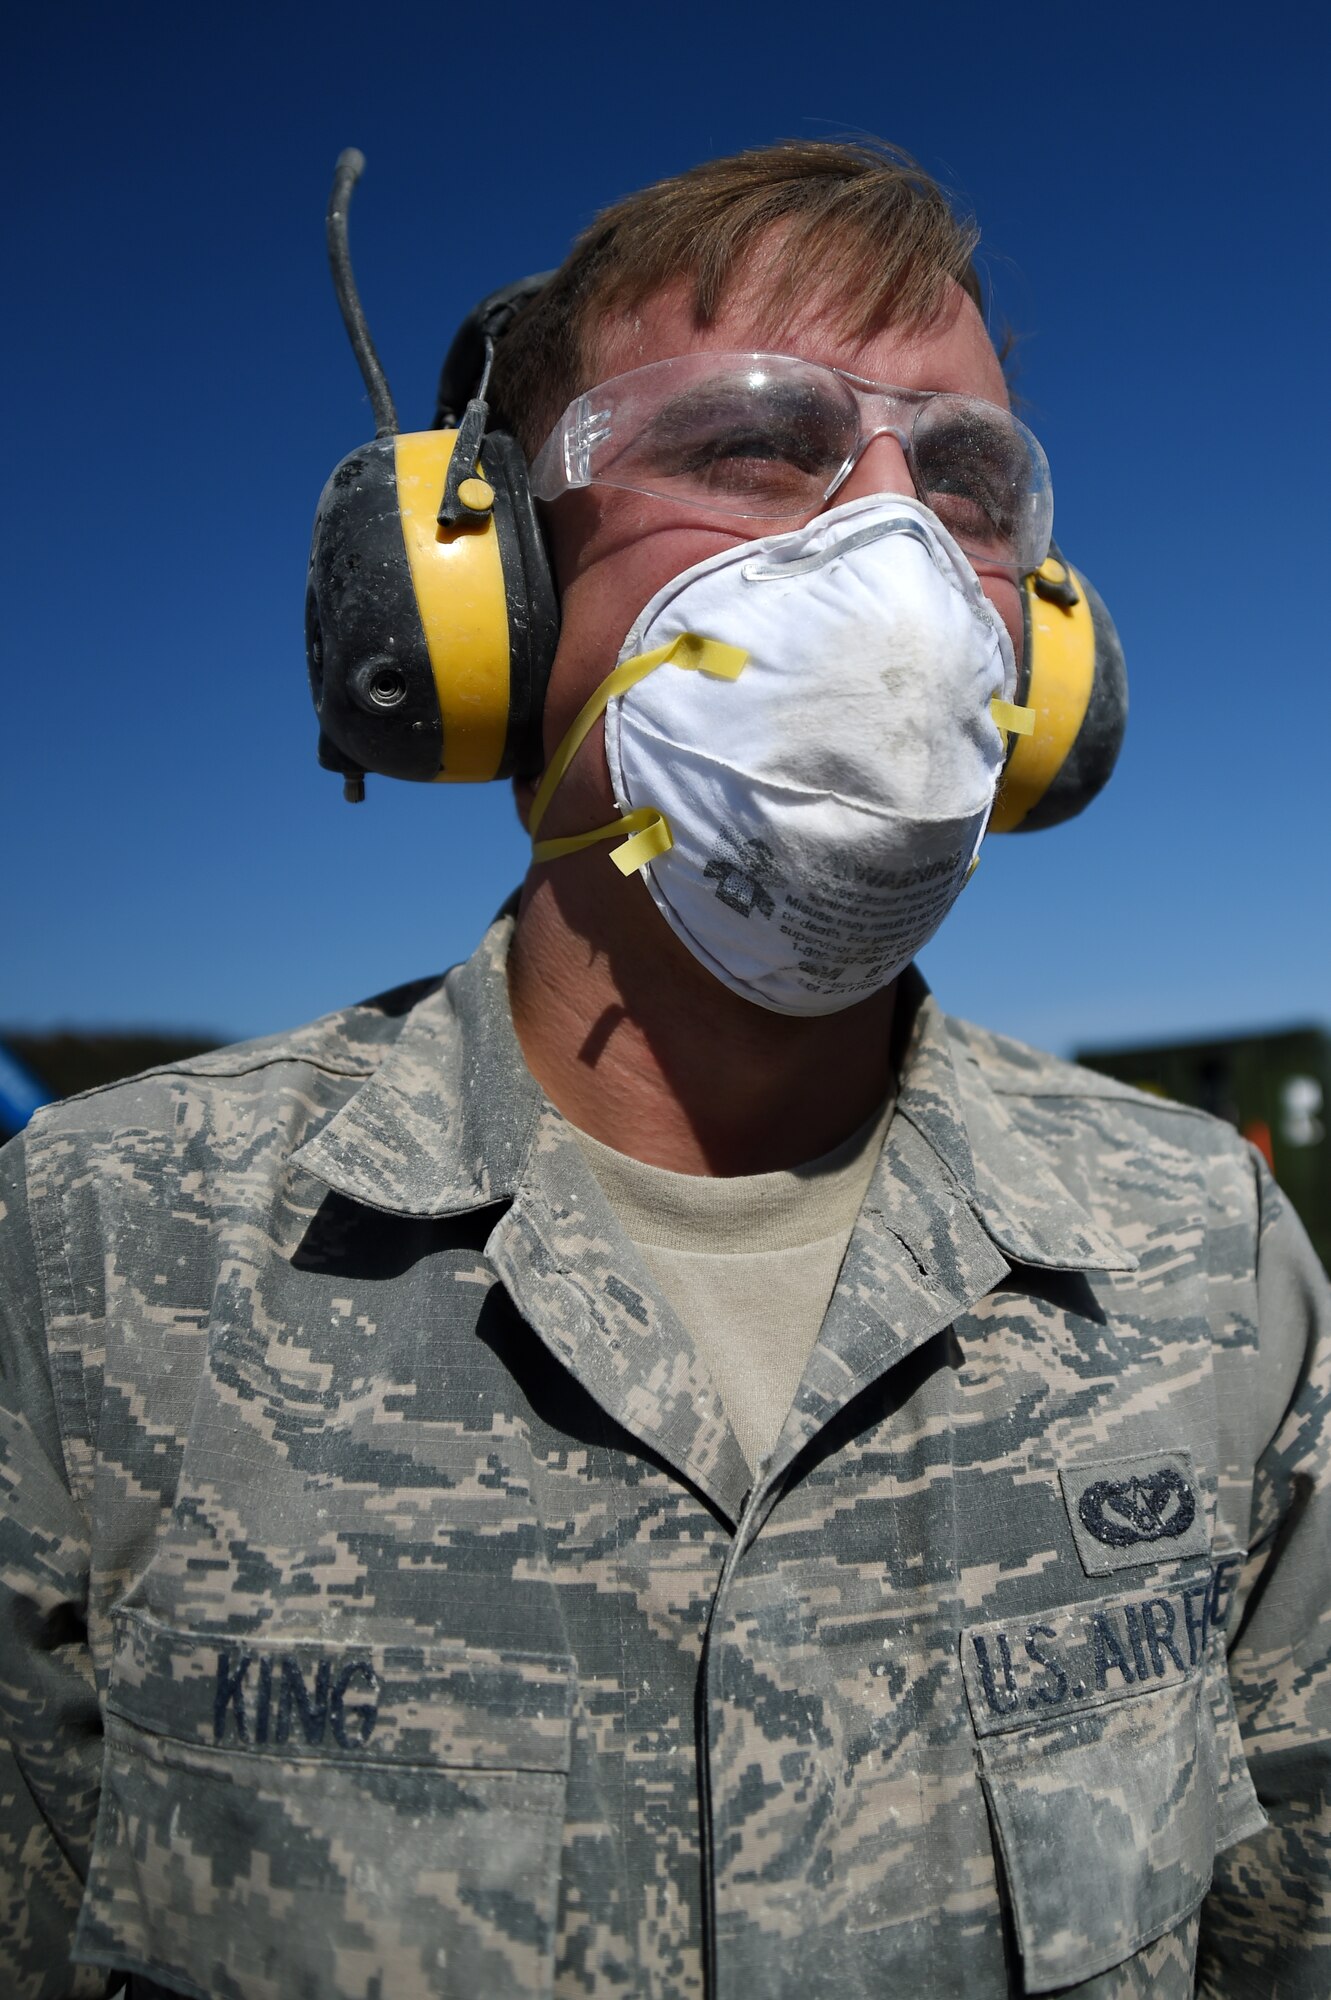 U.S. Air Force Staff Sgt. Jordan King, 773d Civil Engineer Squadron, participates in a Rapid Airfield Damage Repair training exercise at Gwangju Air Base, Republic of Korea., Nov. 9, 2017. Approximately forty U.S. Airmen from the 773d CES at Joint Base Elmendorf-Richardson, Alaska, and 40 R.O.K. Airmen trained together for a week to learn a new runway repair process for wartime contingencies. The bilateral training exercise enhanced interoperability and strengthen partnerships in the Indo-Asia Pacific region. (U.S. Air Force photo by Senior Airman Curt Beach)